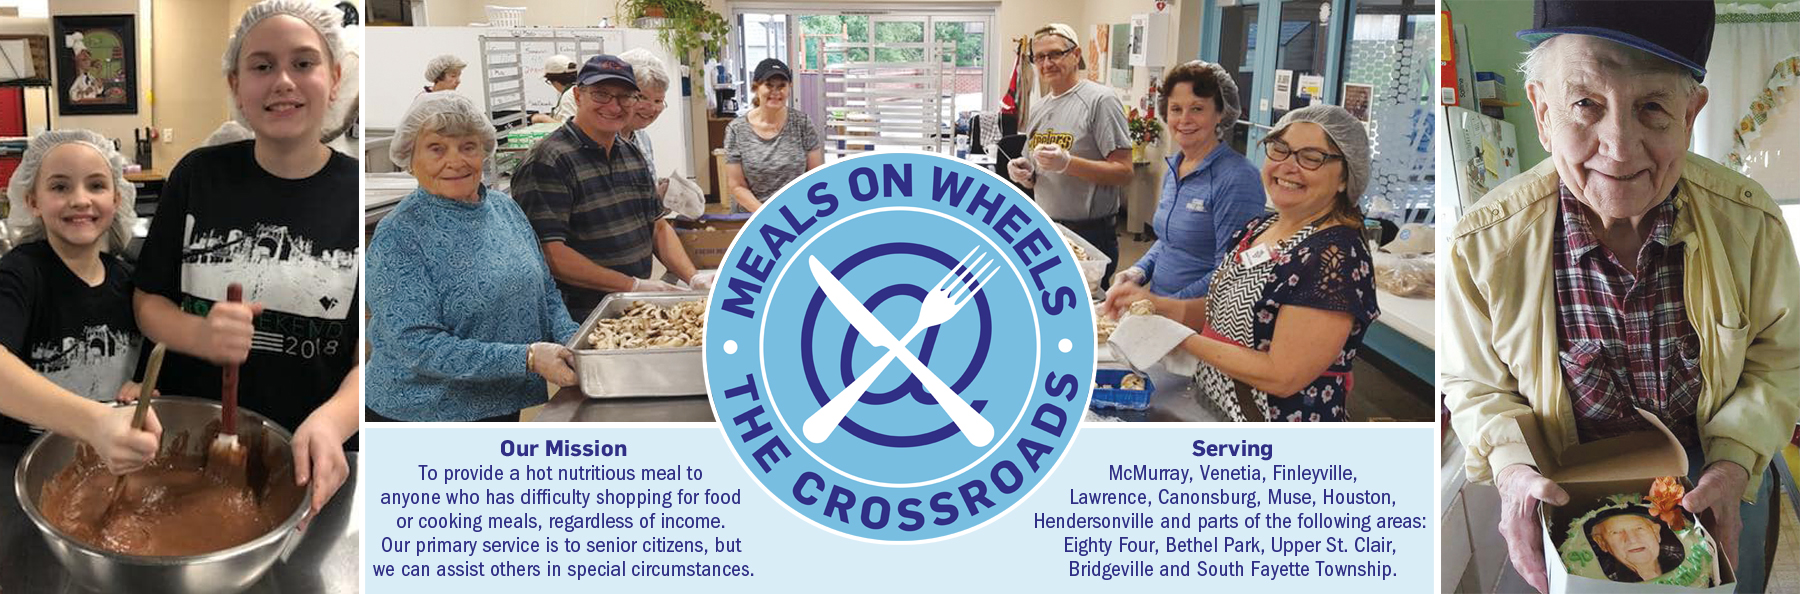 Photos of volunteers, client and Meals on Wheels logo, mission and service areas